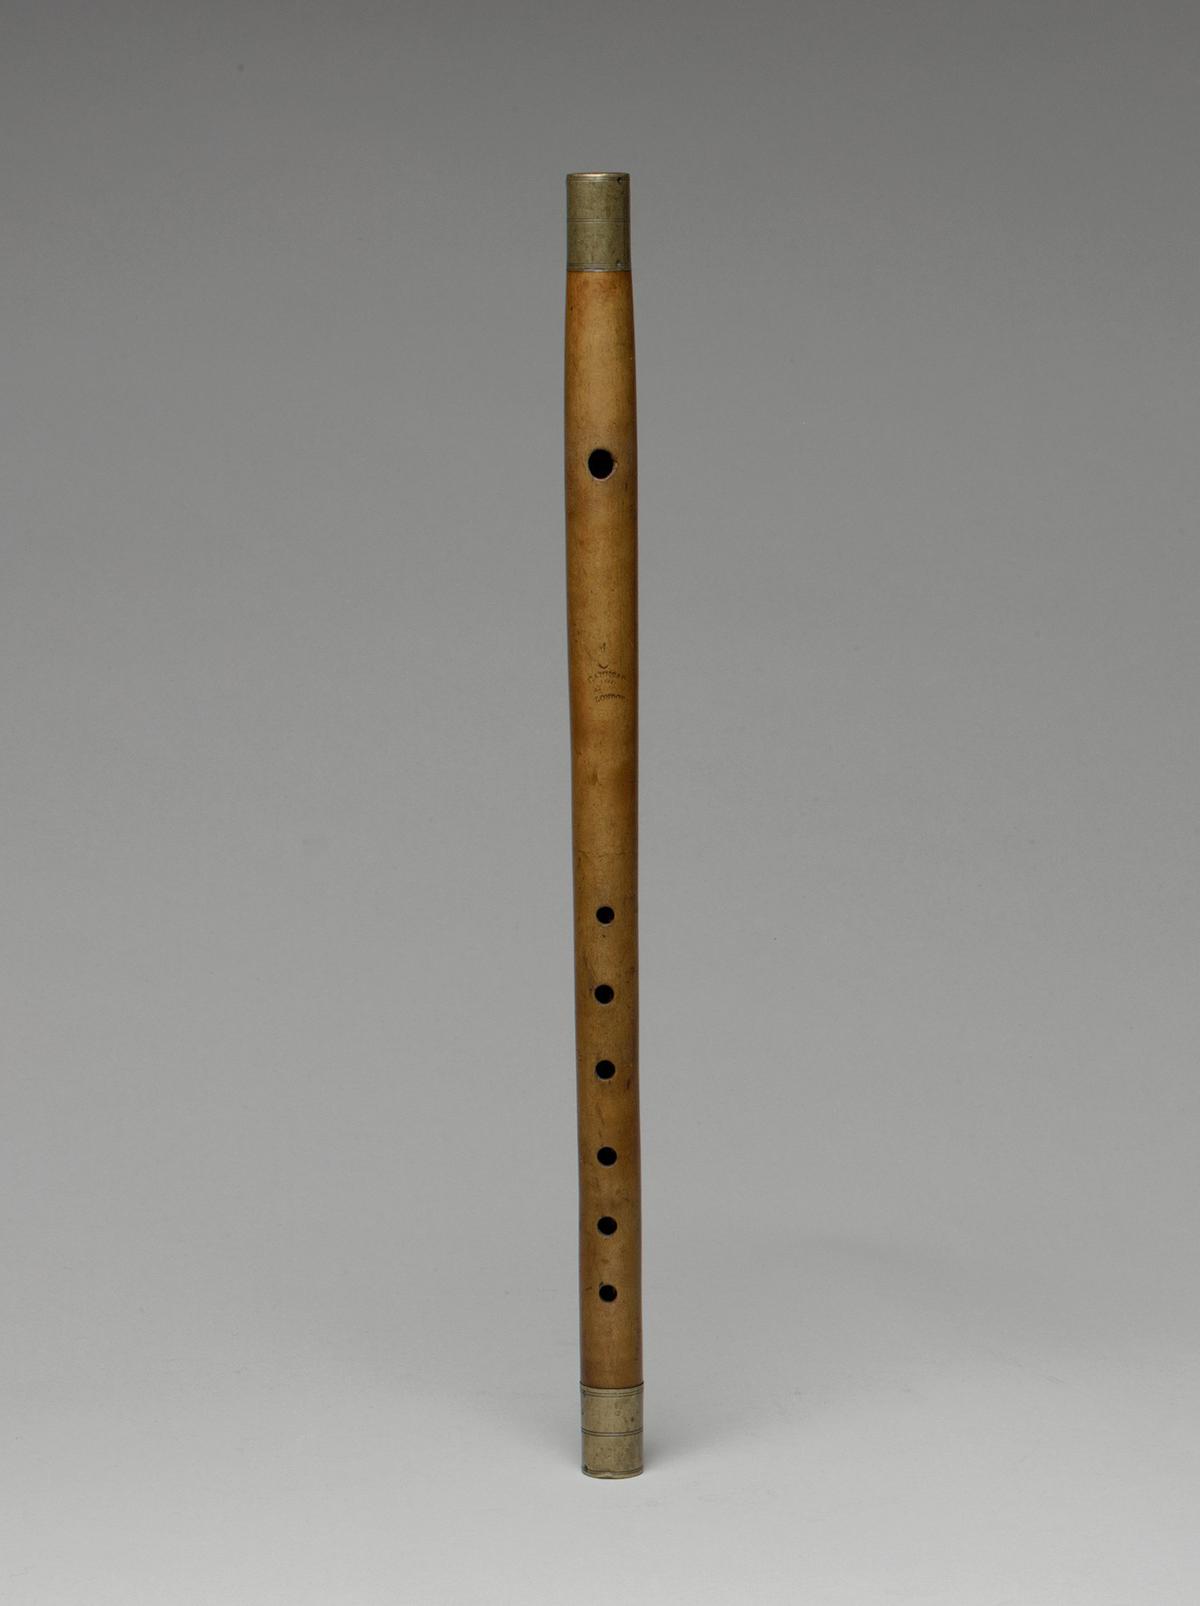 The fife was traditionally used for military purposes. Fife, circa 1780–1790, by Thomas Cahusac. The Metropolitan Museum of Art, New York City. (Public Domain)